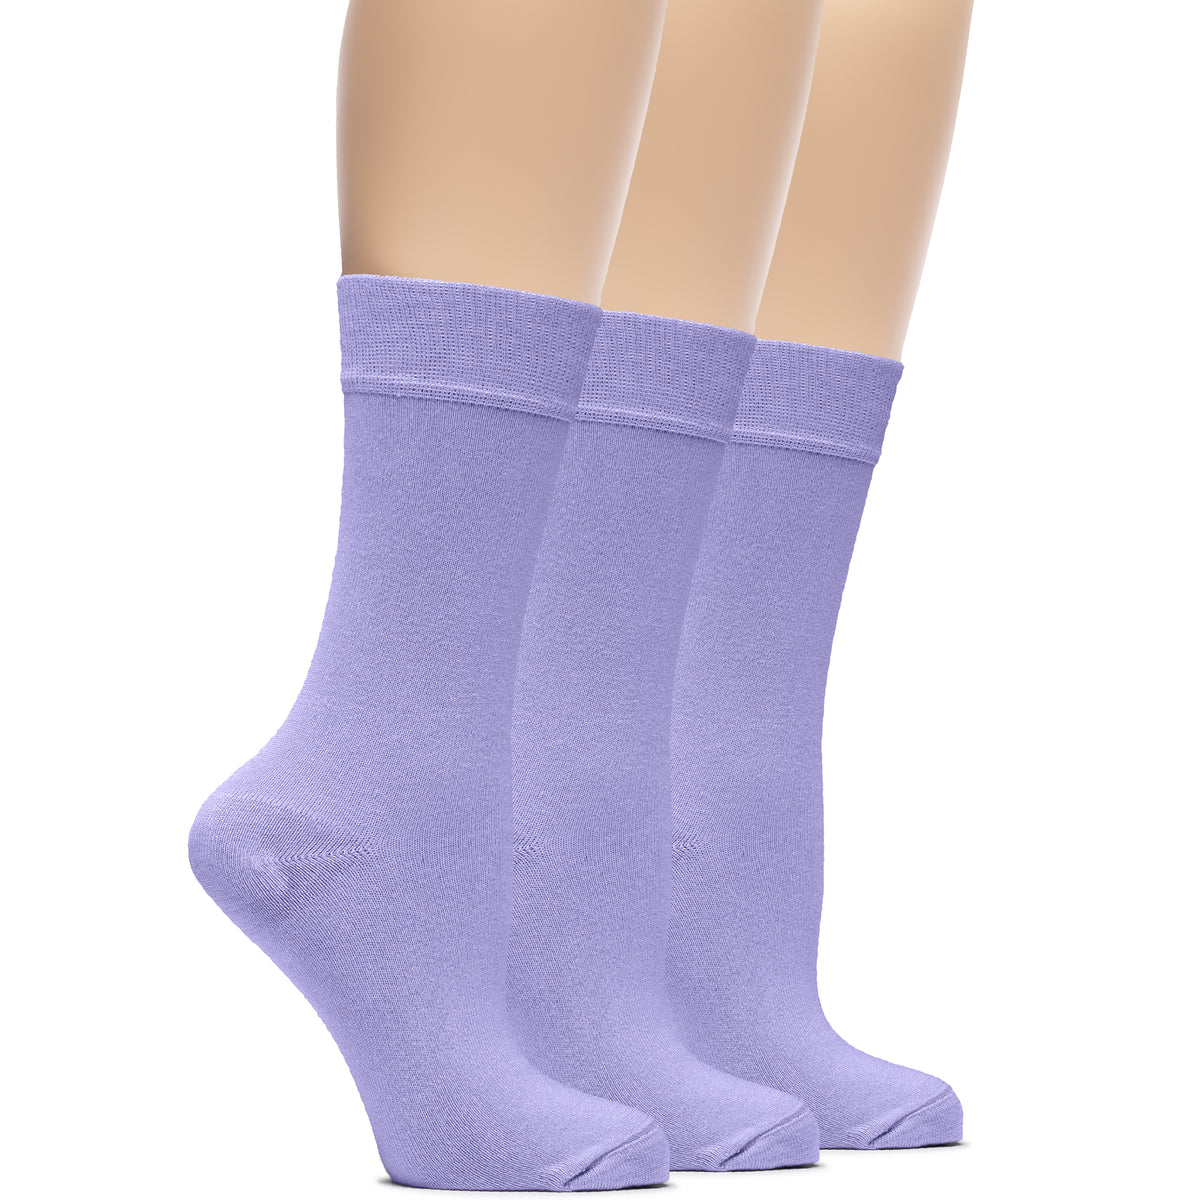 A mannequin displays three Women's Bamboo Crew Socks in purple, perfect for eco-conscious fashionistas.